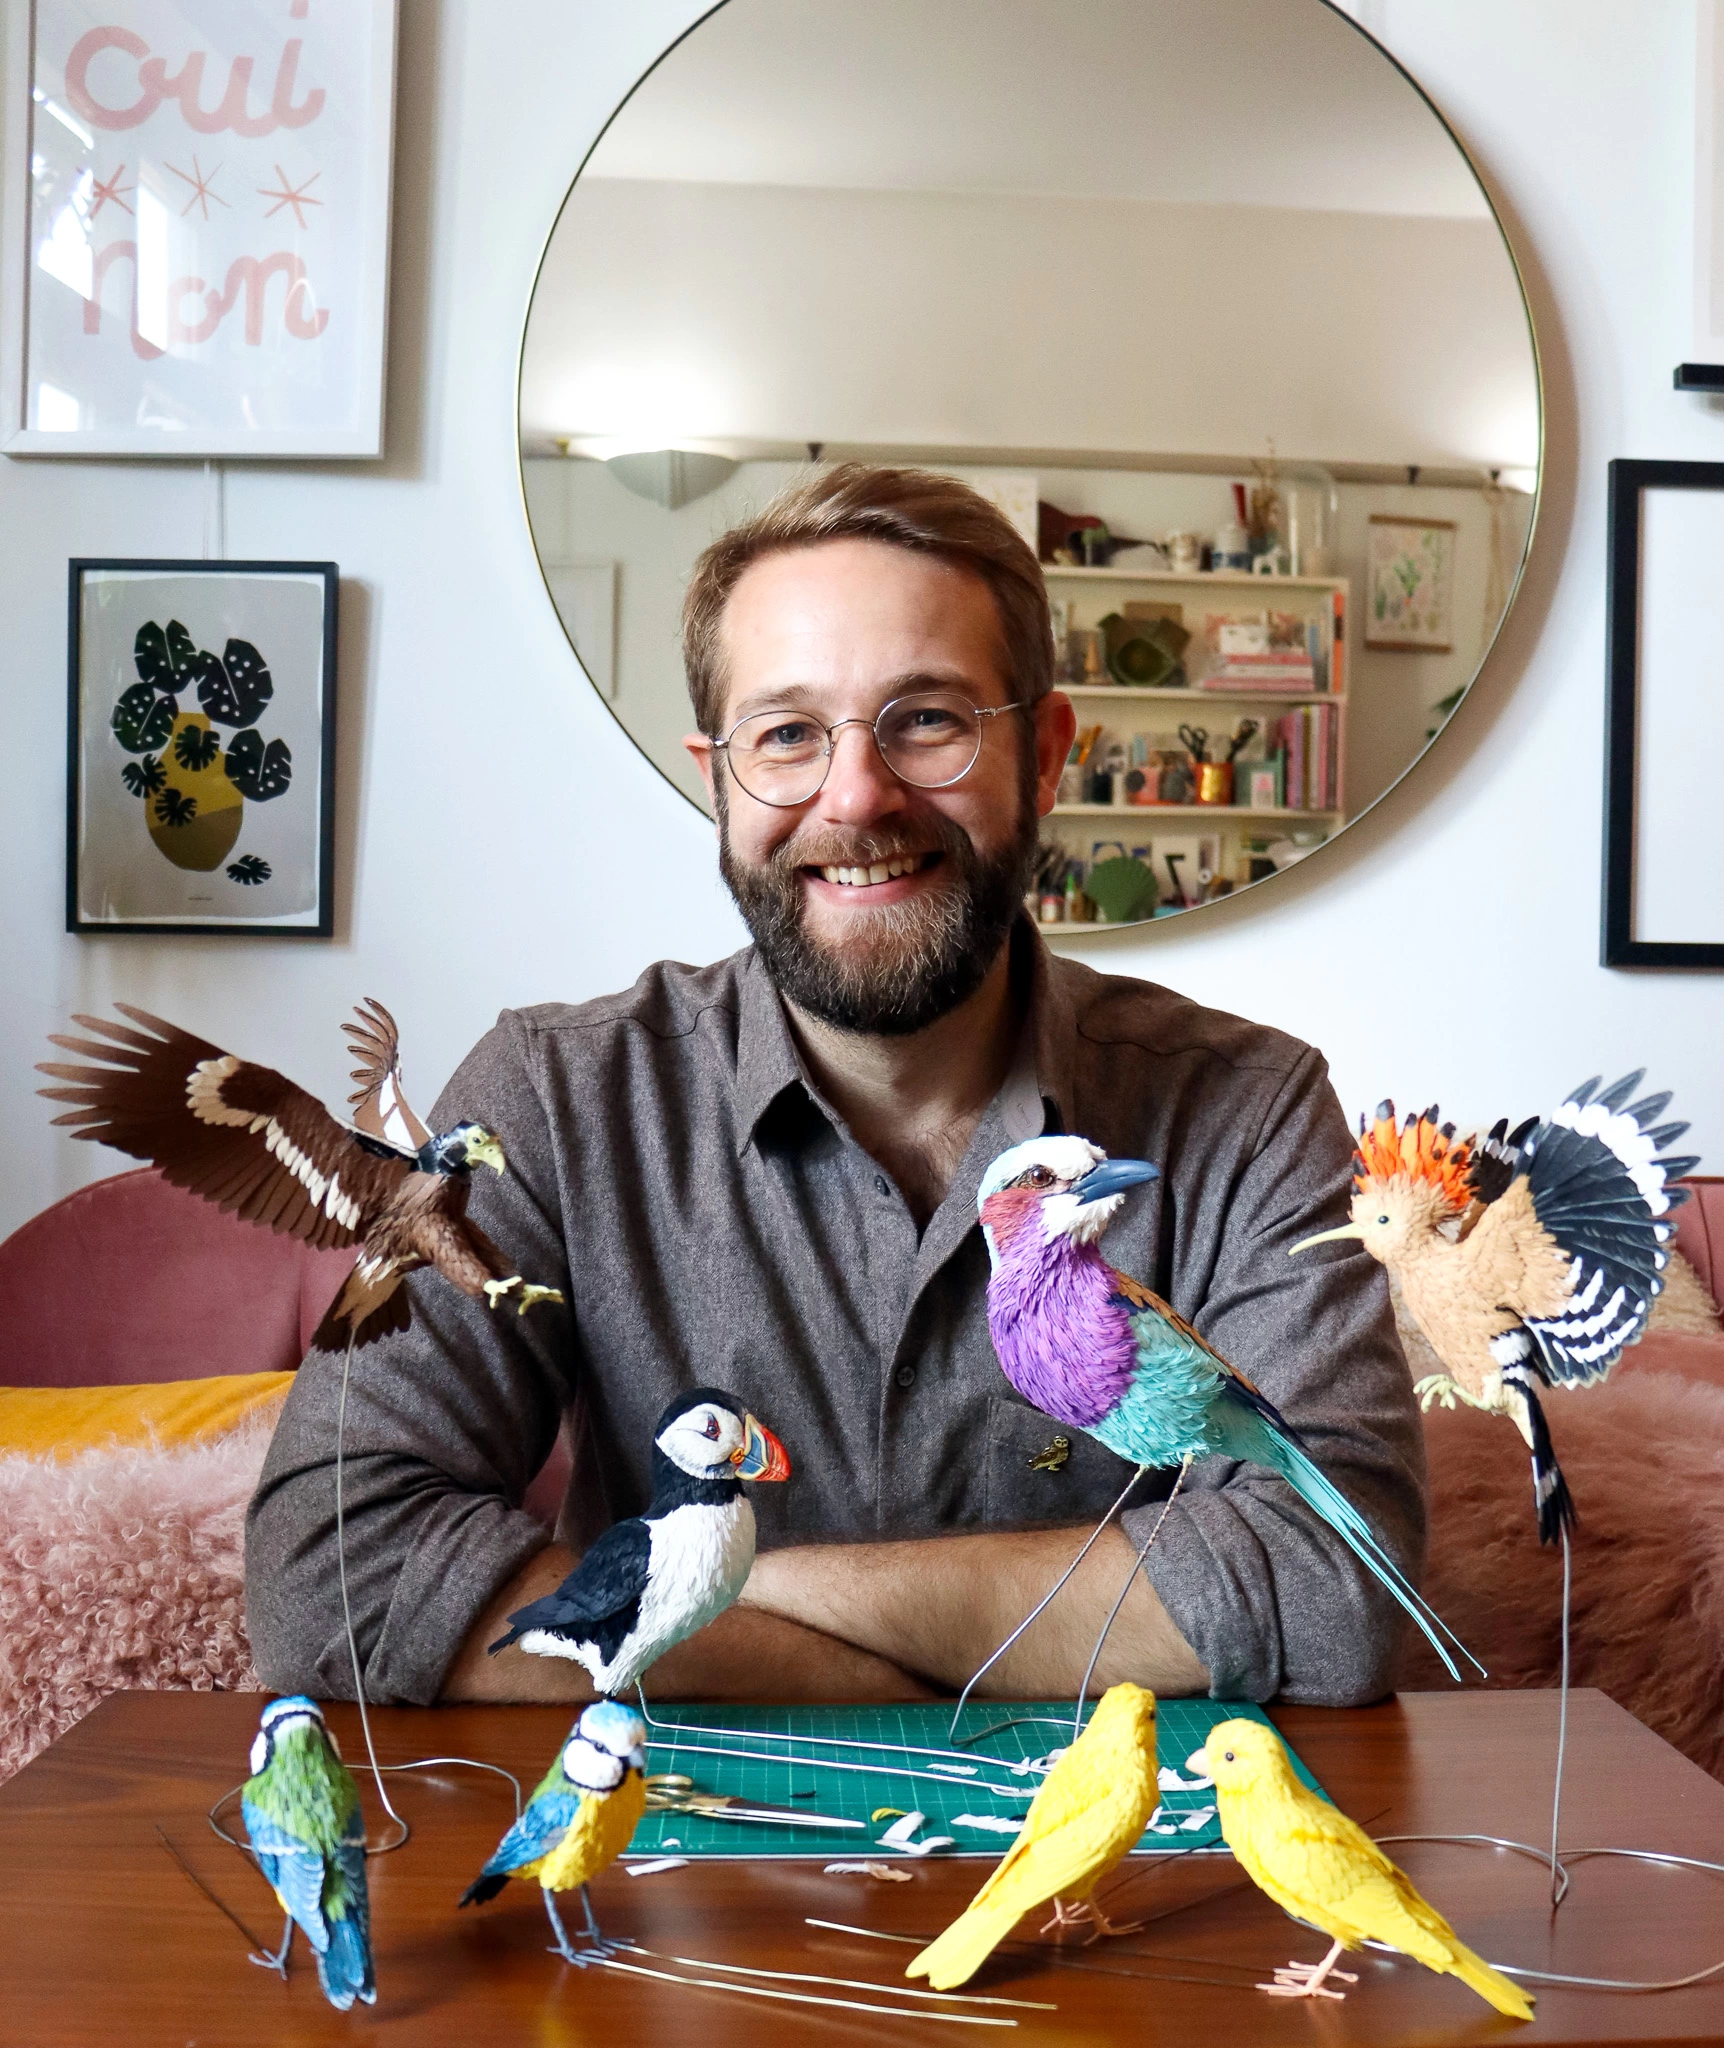 Zack Mclaughlin from Paper & Wood sat smiling  behind a few of his paper bird creations